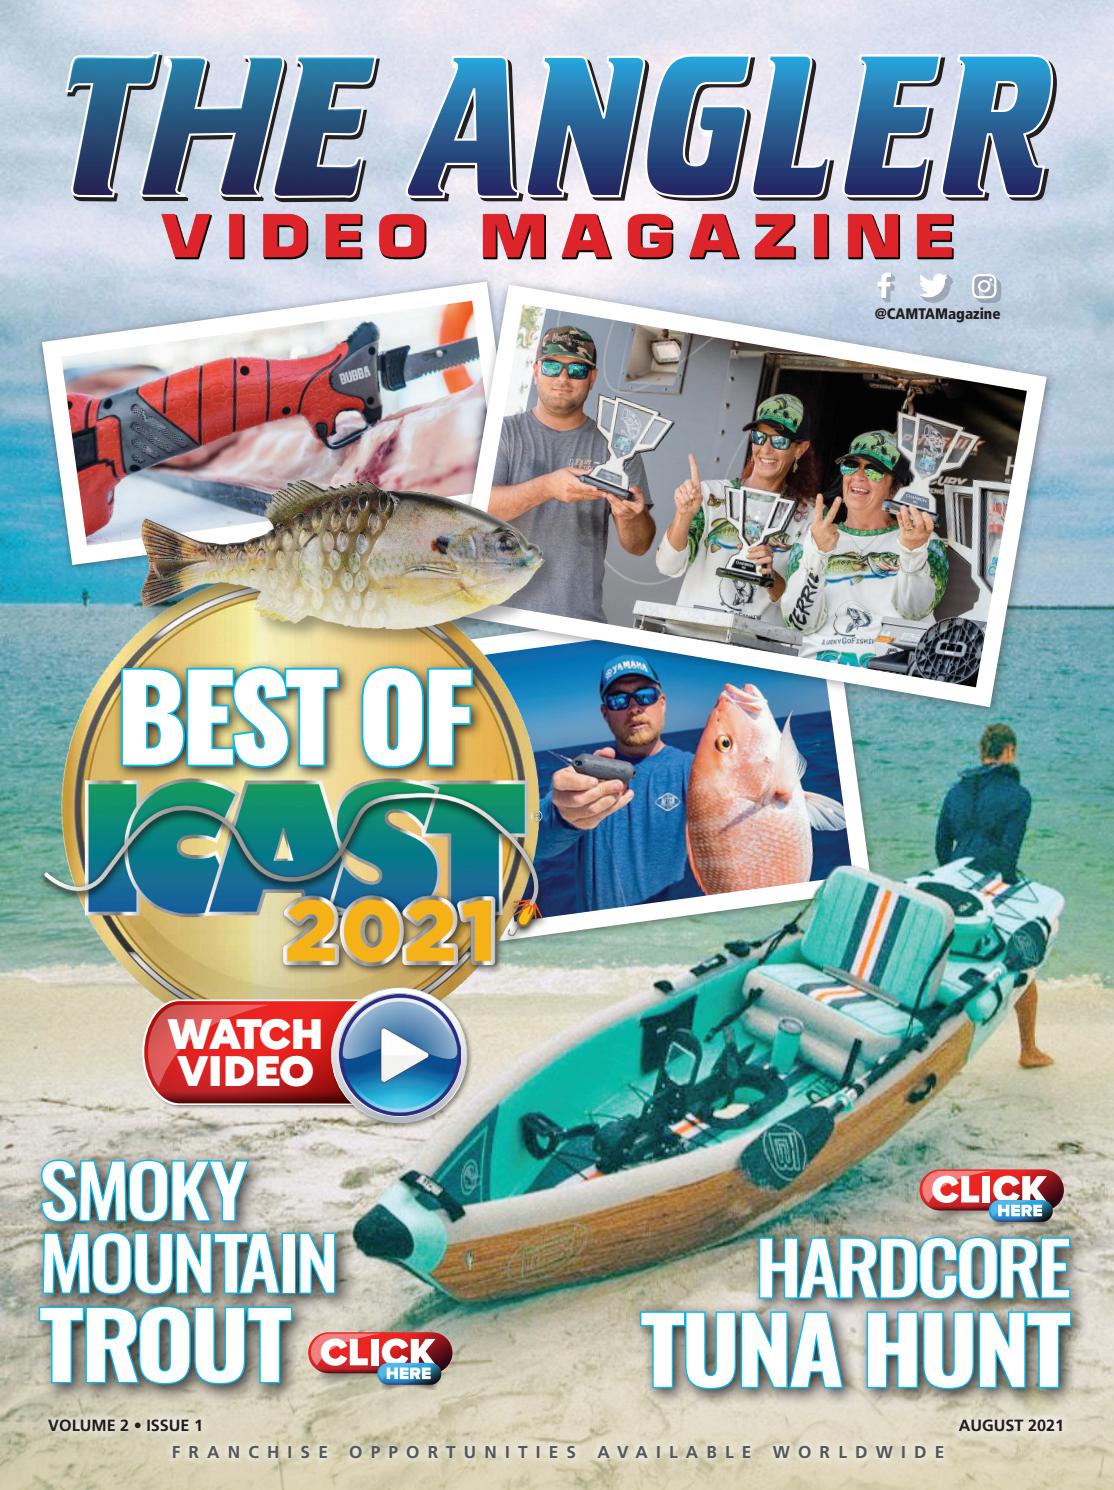 The Angler Video Magazine August 2021 ICAST Edition